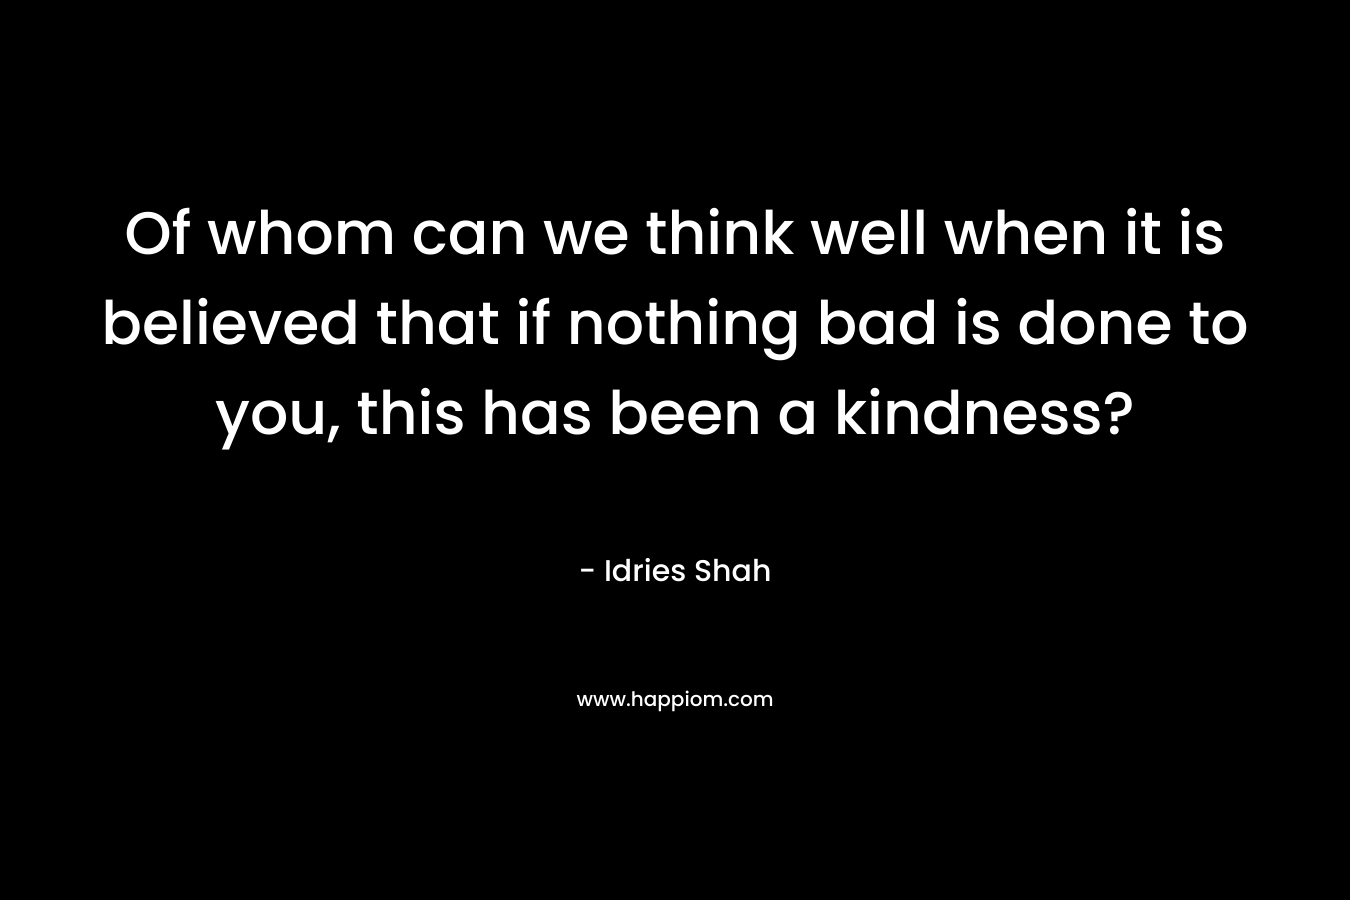 Of whom can we think well when it is believed that if nothing bad is done to you, this has been a kindness? – Idries Shah